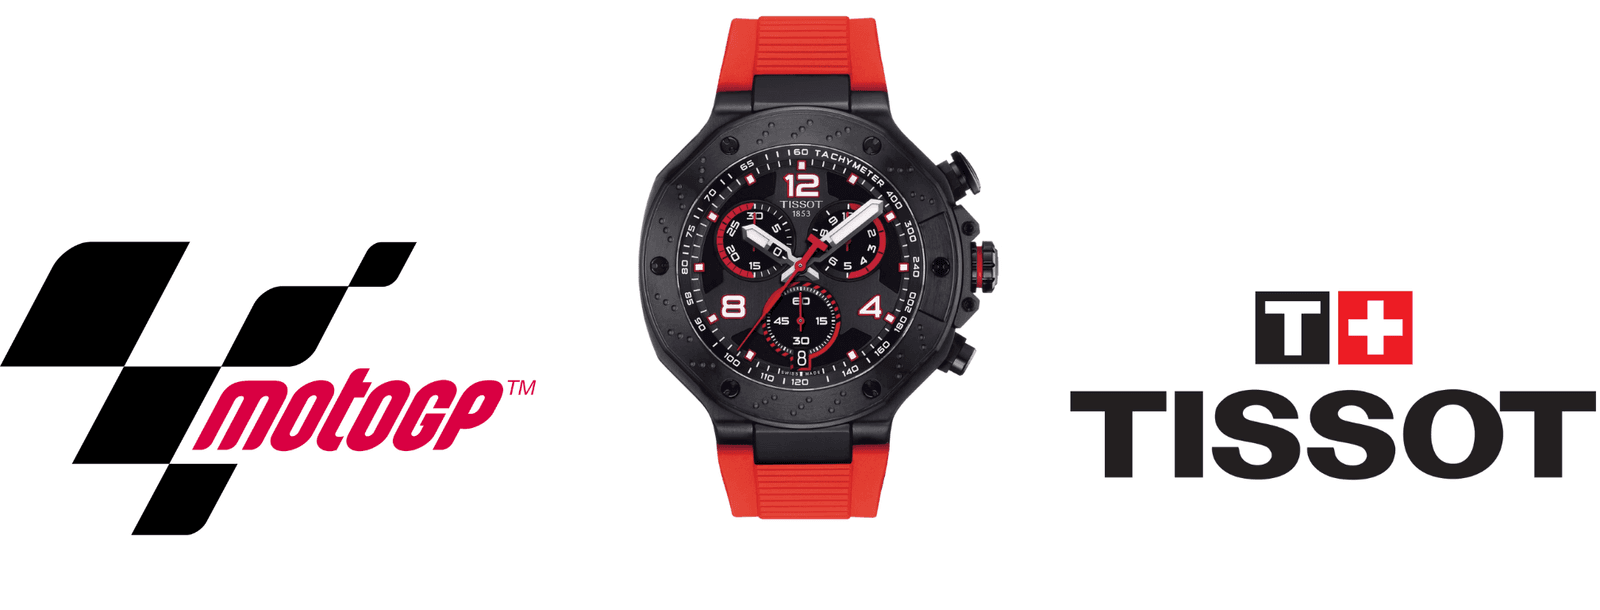 MotoGP and Tissot - A partnership that started in 2001